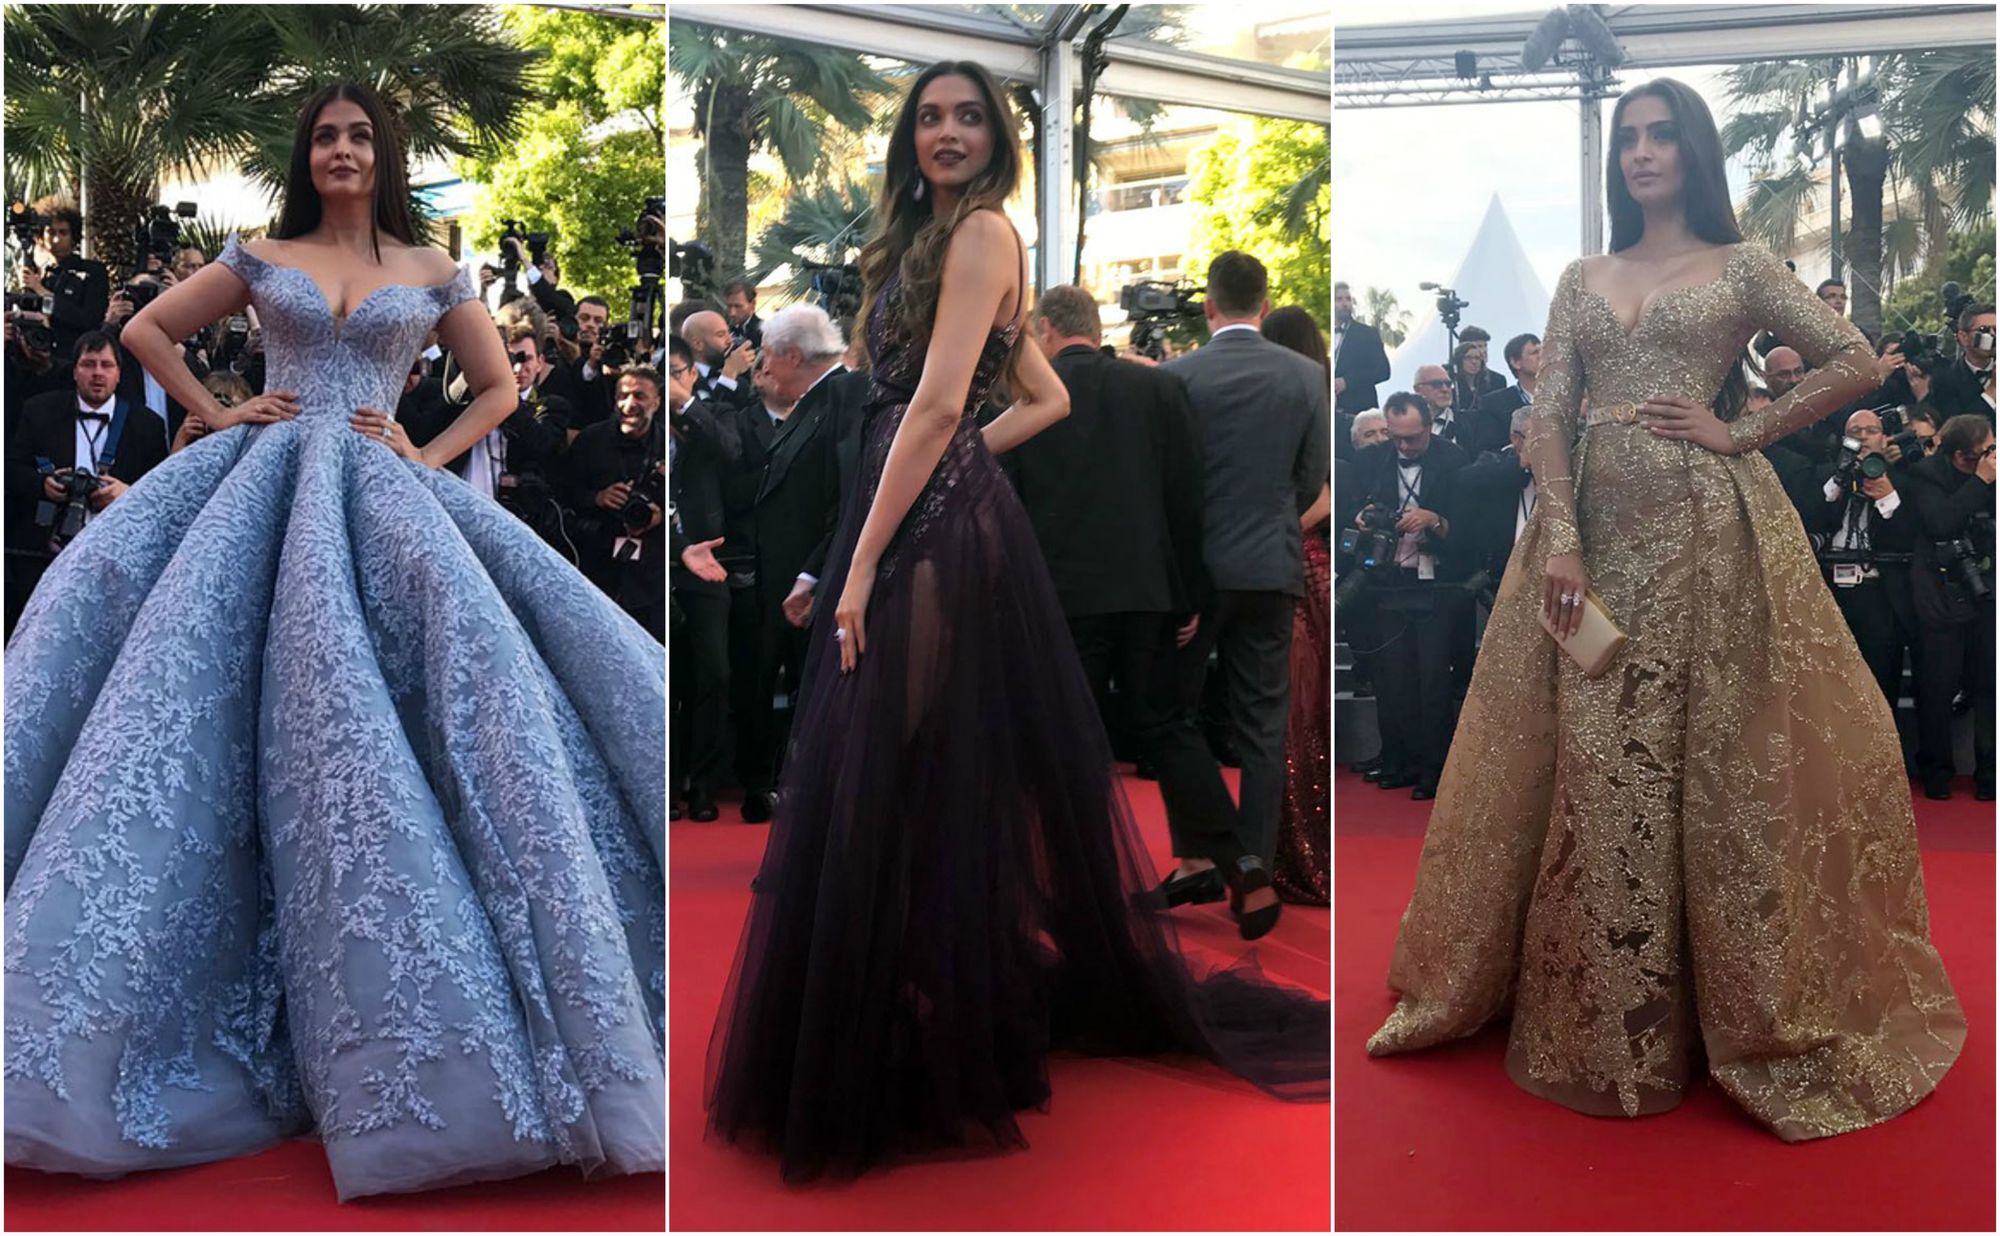 Top 10 Unforgettable Fashion Moments From Cannes 2017